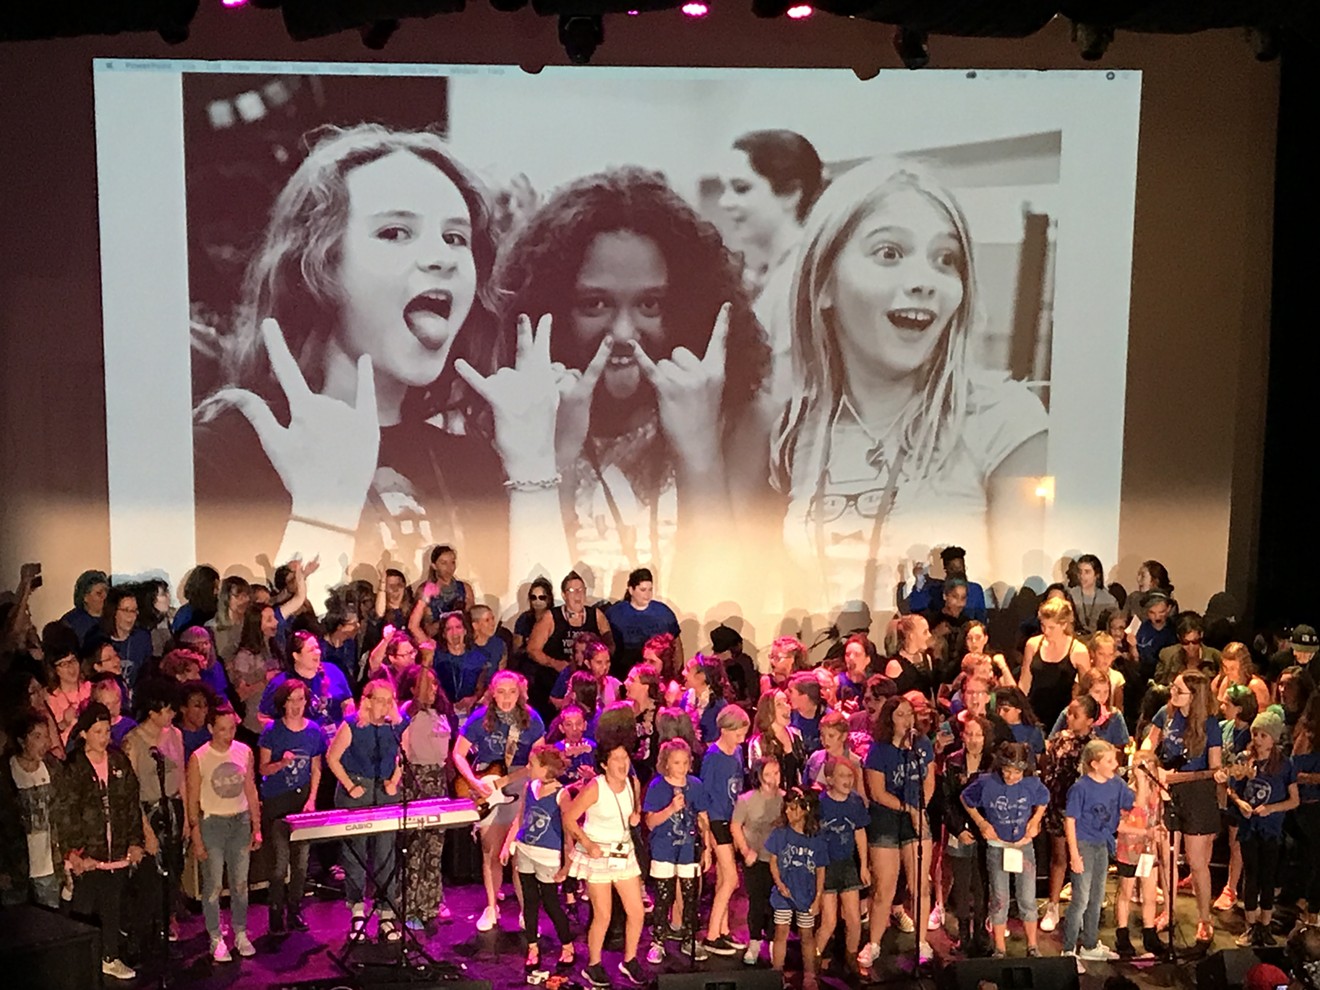 Denver Arts & Venues announces the recipients of $100,000 in grants to boost the music scene. In the mix: Girls Rock Denver.